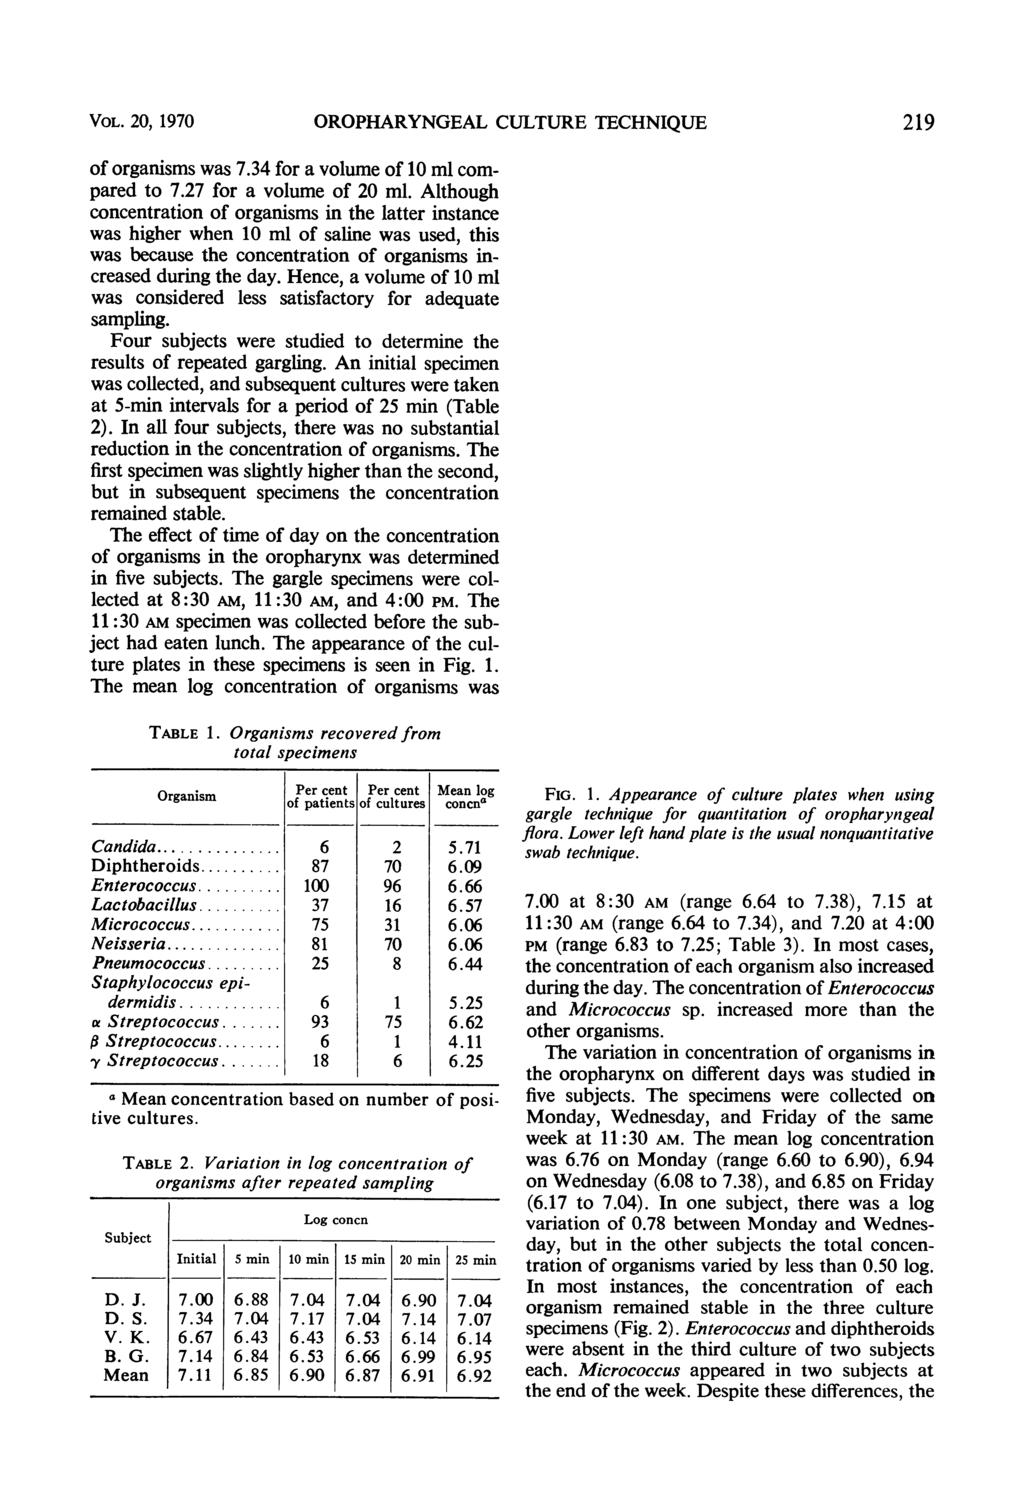 VOL. 20, 1970 OROPHARYNGEAL CULTURE TECHNIQUE 219 of organisms was 7.34 for a volume of 10 ml compared to 7.27 for a volume of 20 ml.